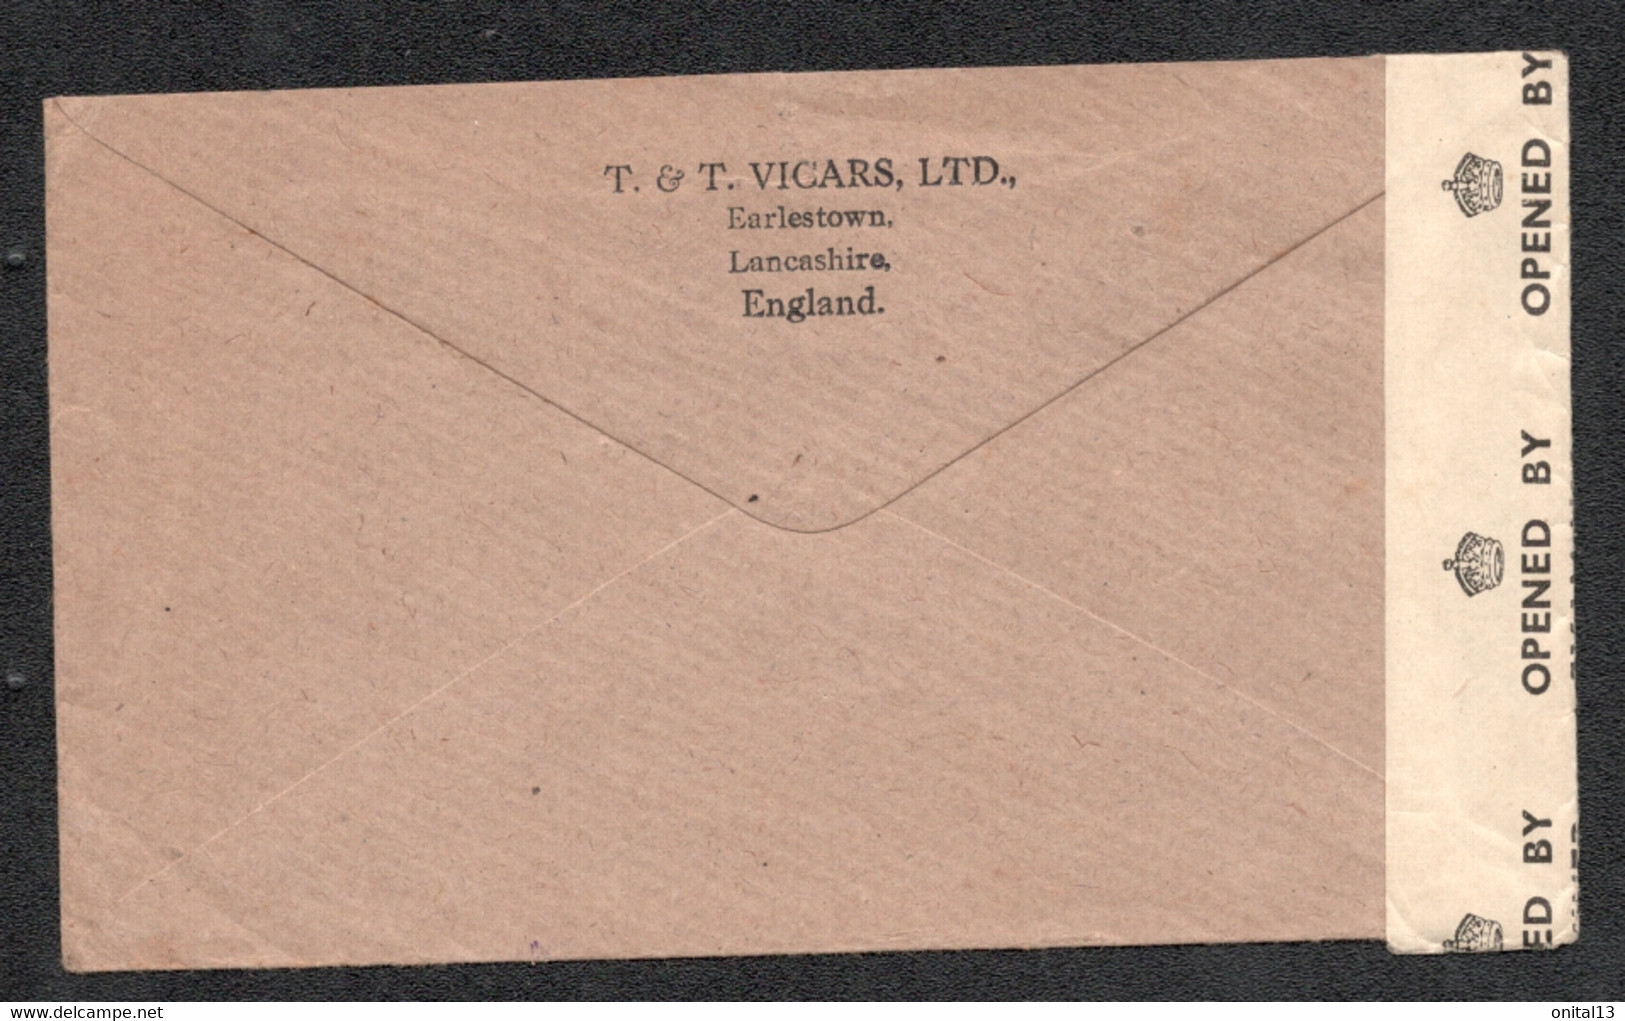 1942 CACHET CENSURE / OPEN BY EXAMINER 55 PC90 / EMA VICARS NEWTON LE WILLOWS LANCASHIRE / BISCUITERIE GONDOLO     D499 - Postmark Collection